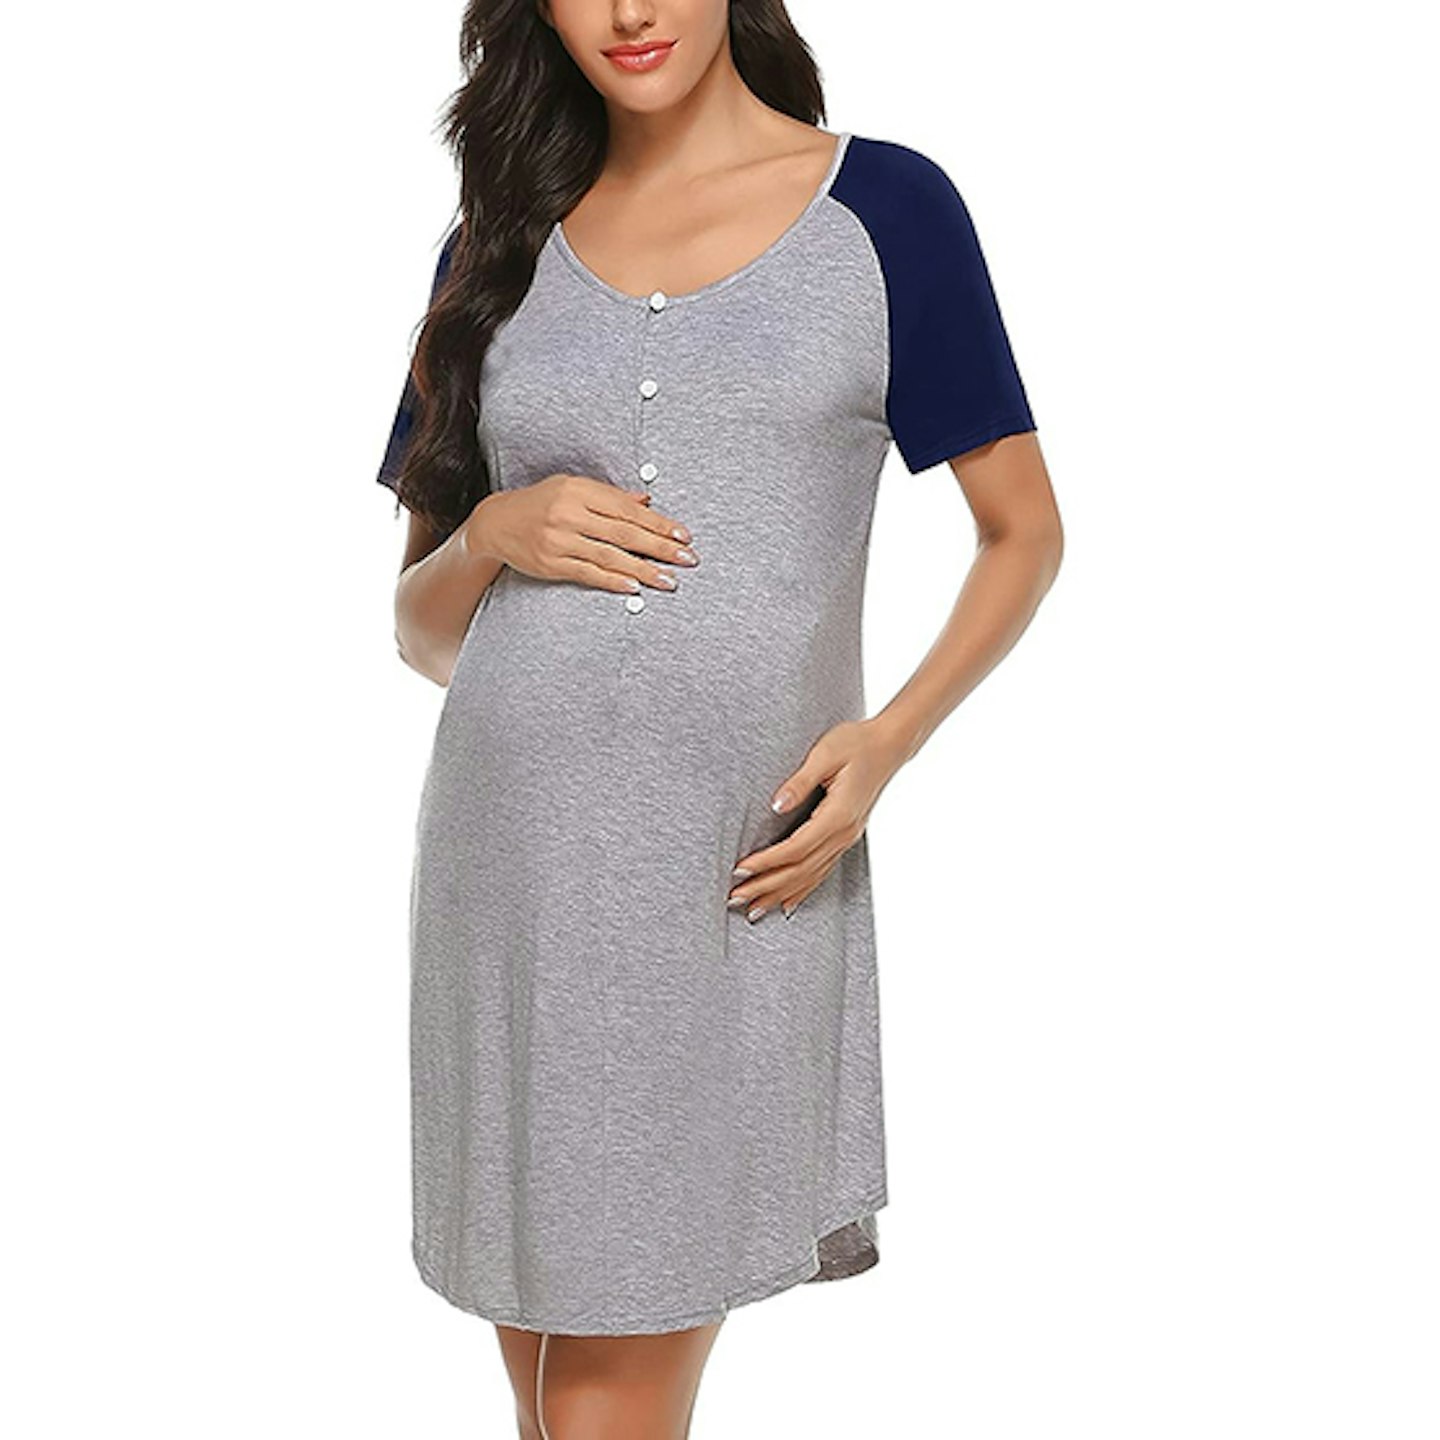 The best maternity pyjamas for mums-to-be